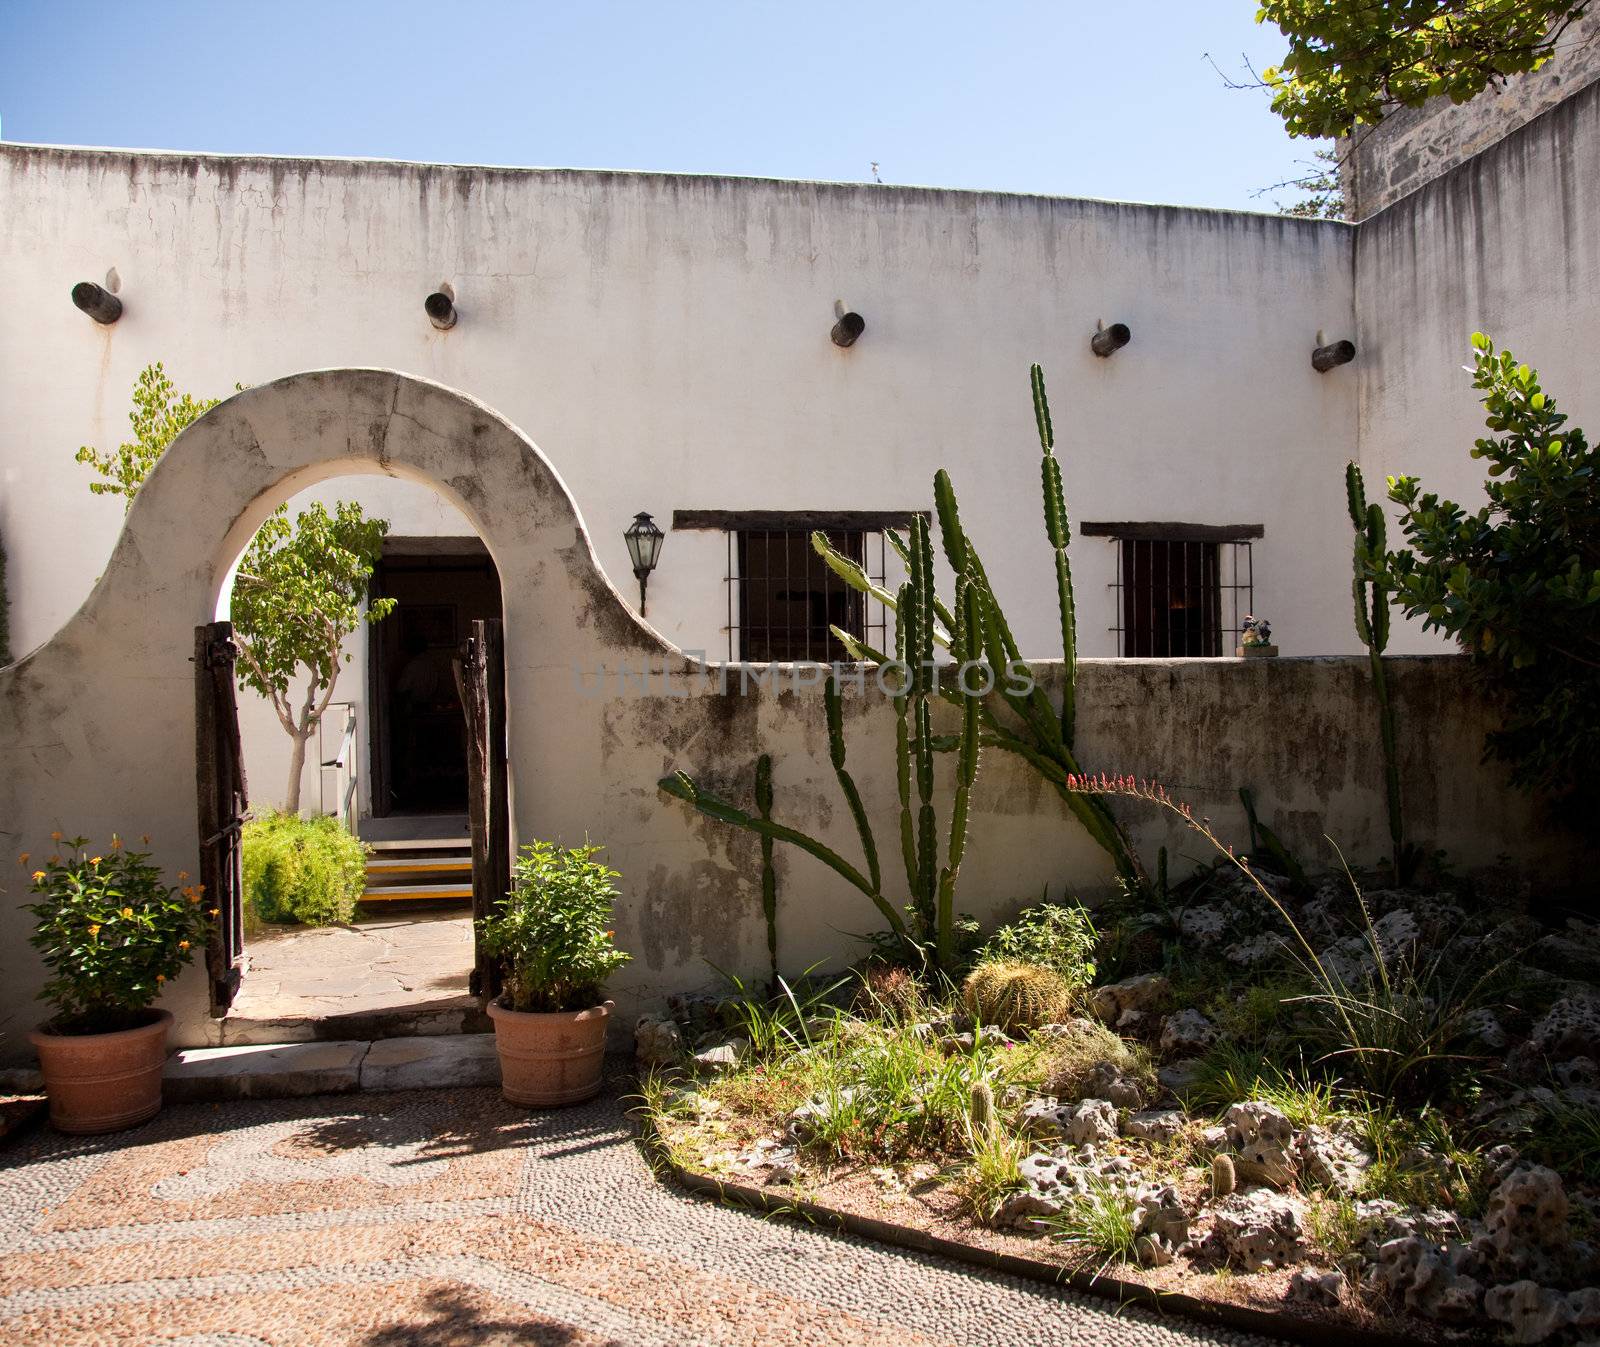 Shady garden in old Mexican house by steheap